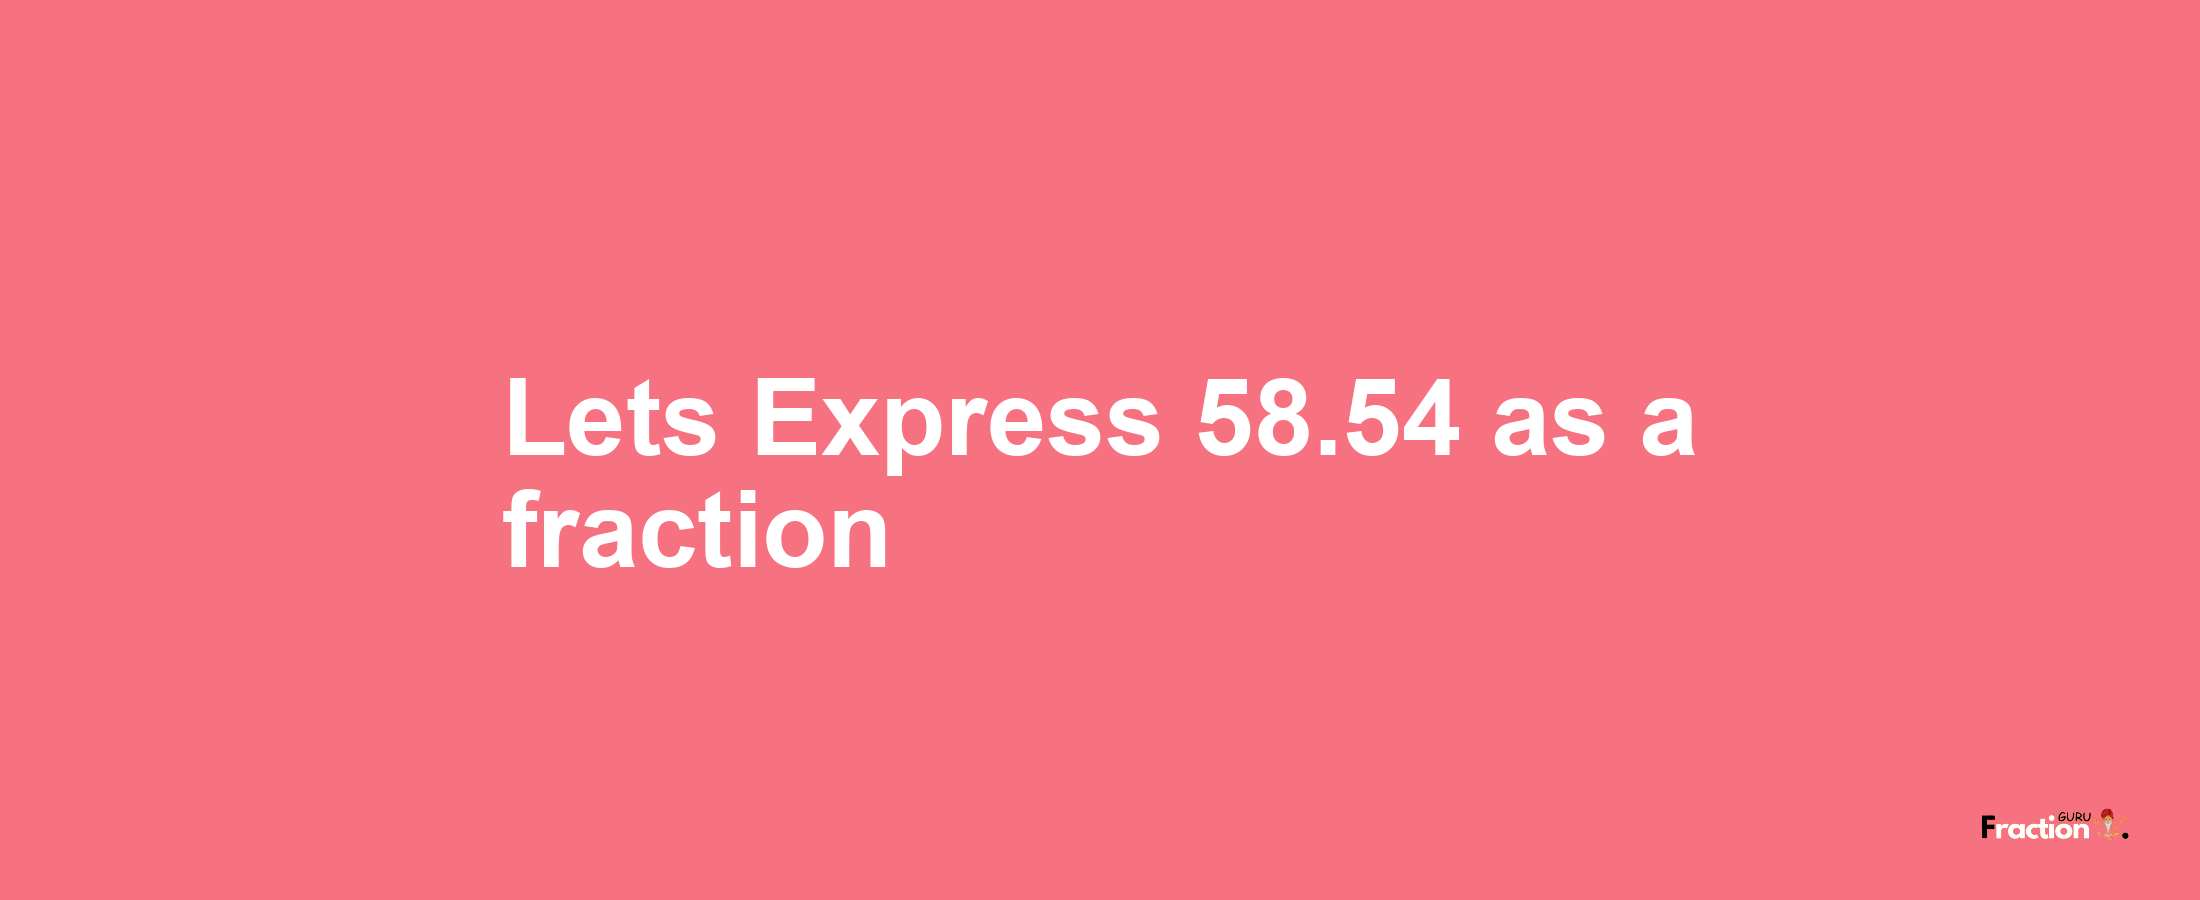 Lets Express 58.54 as afraction